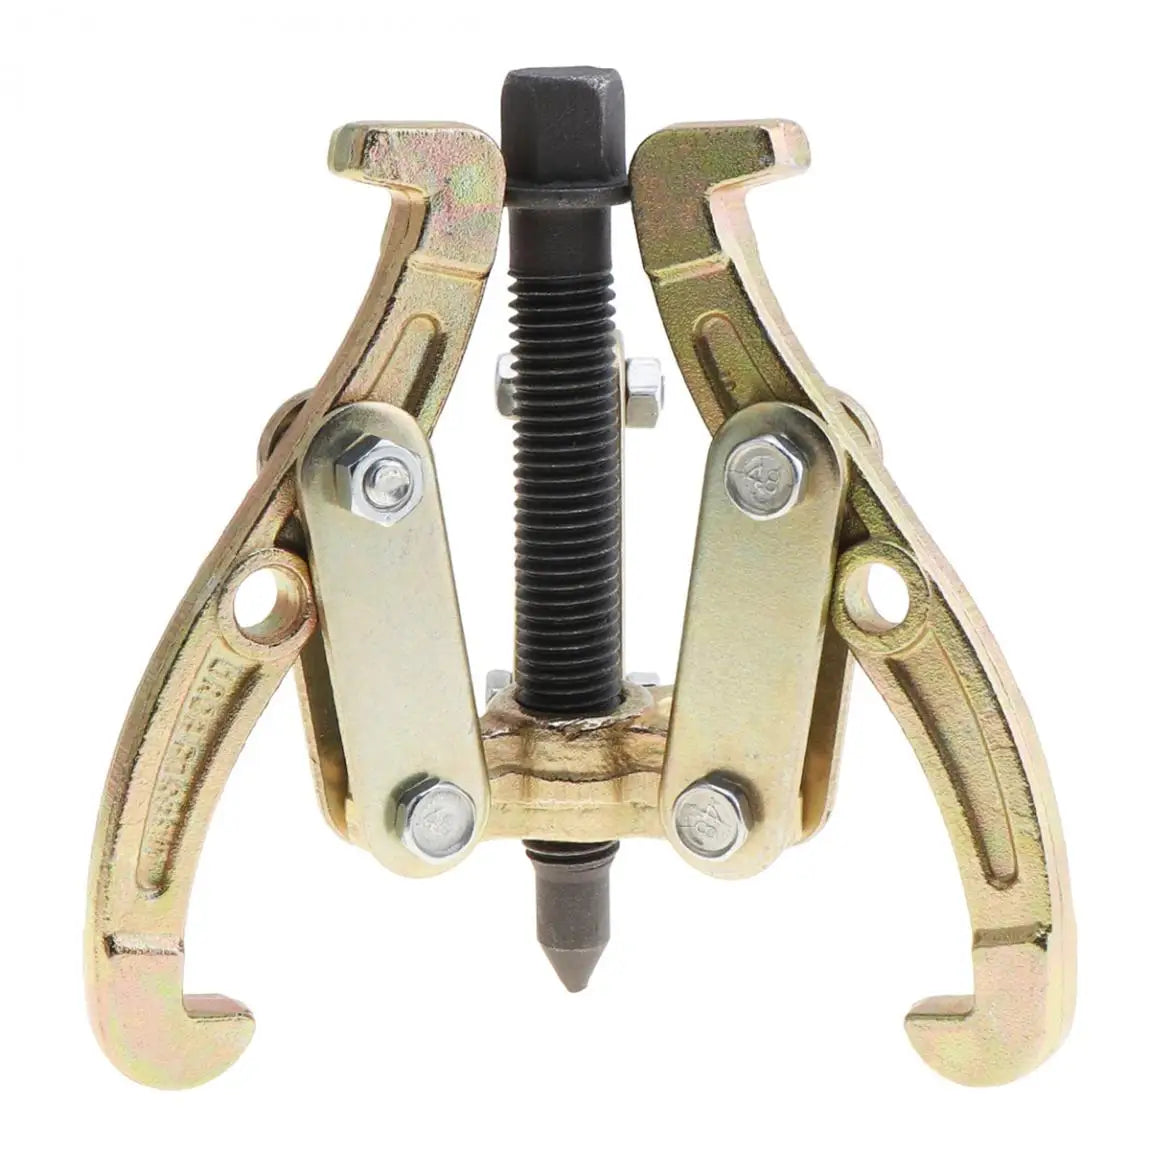 3 Inch Standard Steel2 Claw/3 Claw Bearing Puller Multi-purpose Rama with 4 Single Hole Claw Pullers